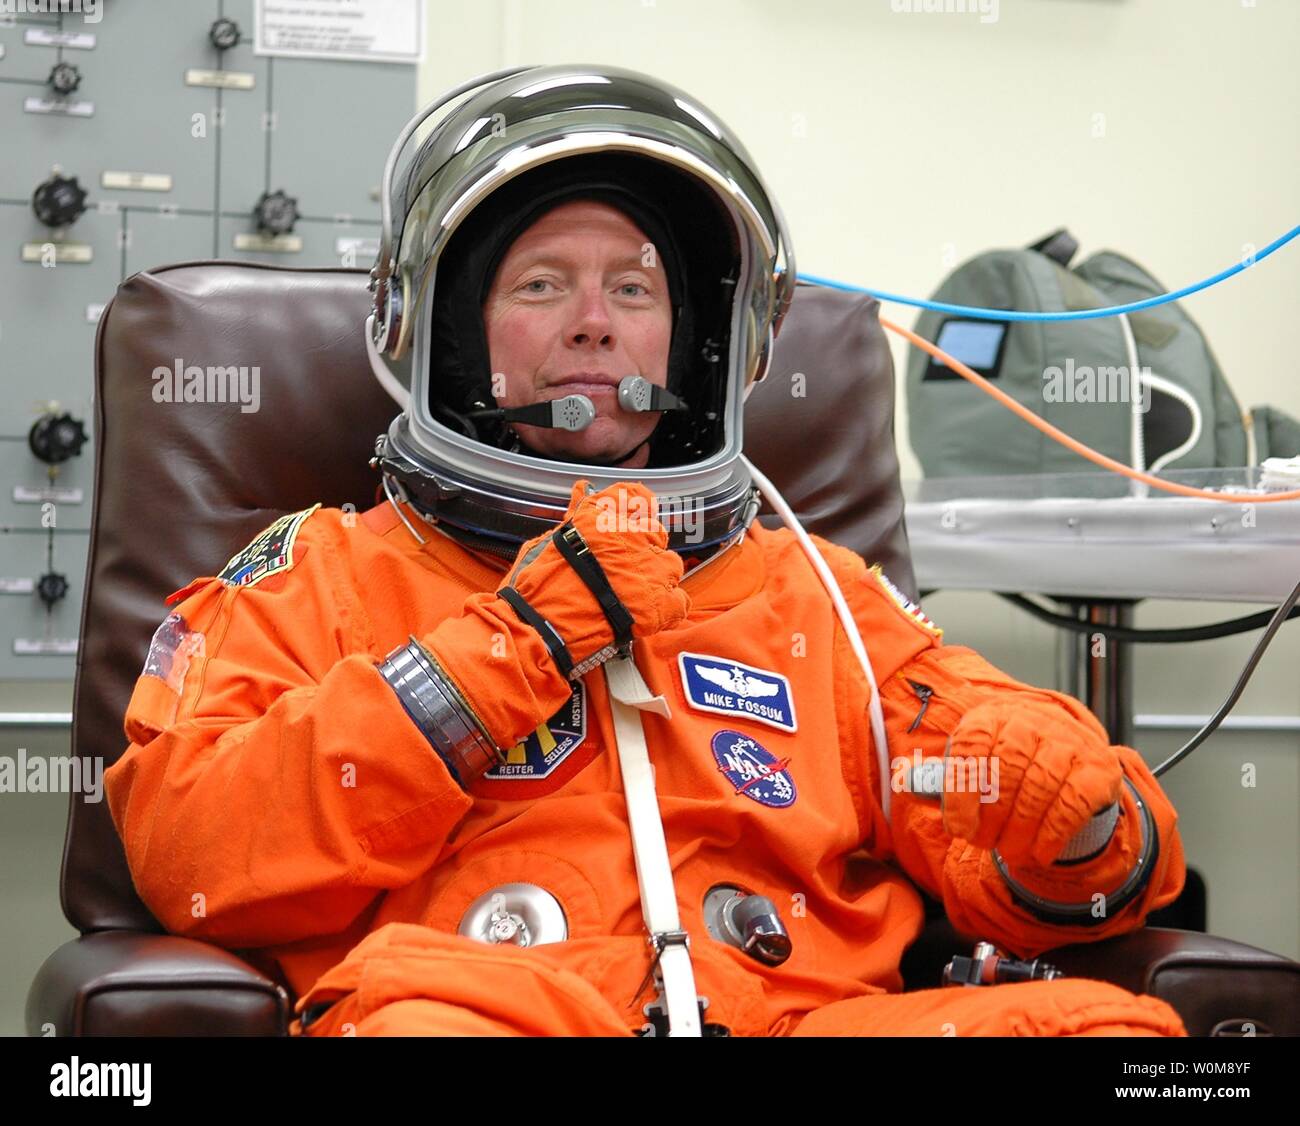 The STS-121 crew are donning their orange launch and entry suits for launch today on Space Shuttle Discovery on July 1, 2006. Adjusting his helmet is Mission Specialist Michael Fossum, who is making his first space flight. The launch is the 115th shuttle flight and the 18th U.S. flight to the International Space Station. During the 12-day mission, the STS-121 crew will test new equipment and procedures to improve shuttle safety, as well as deliver supplies and make repairs to the International Space Station. (UPI Photo/Kim Shiflett/NASA) Stock Photo